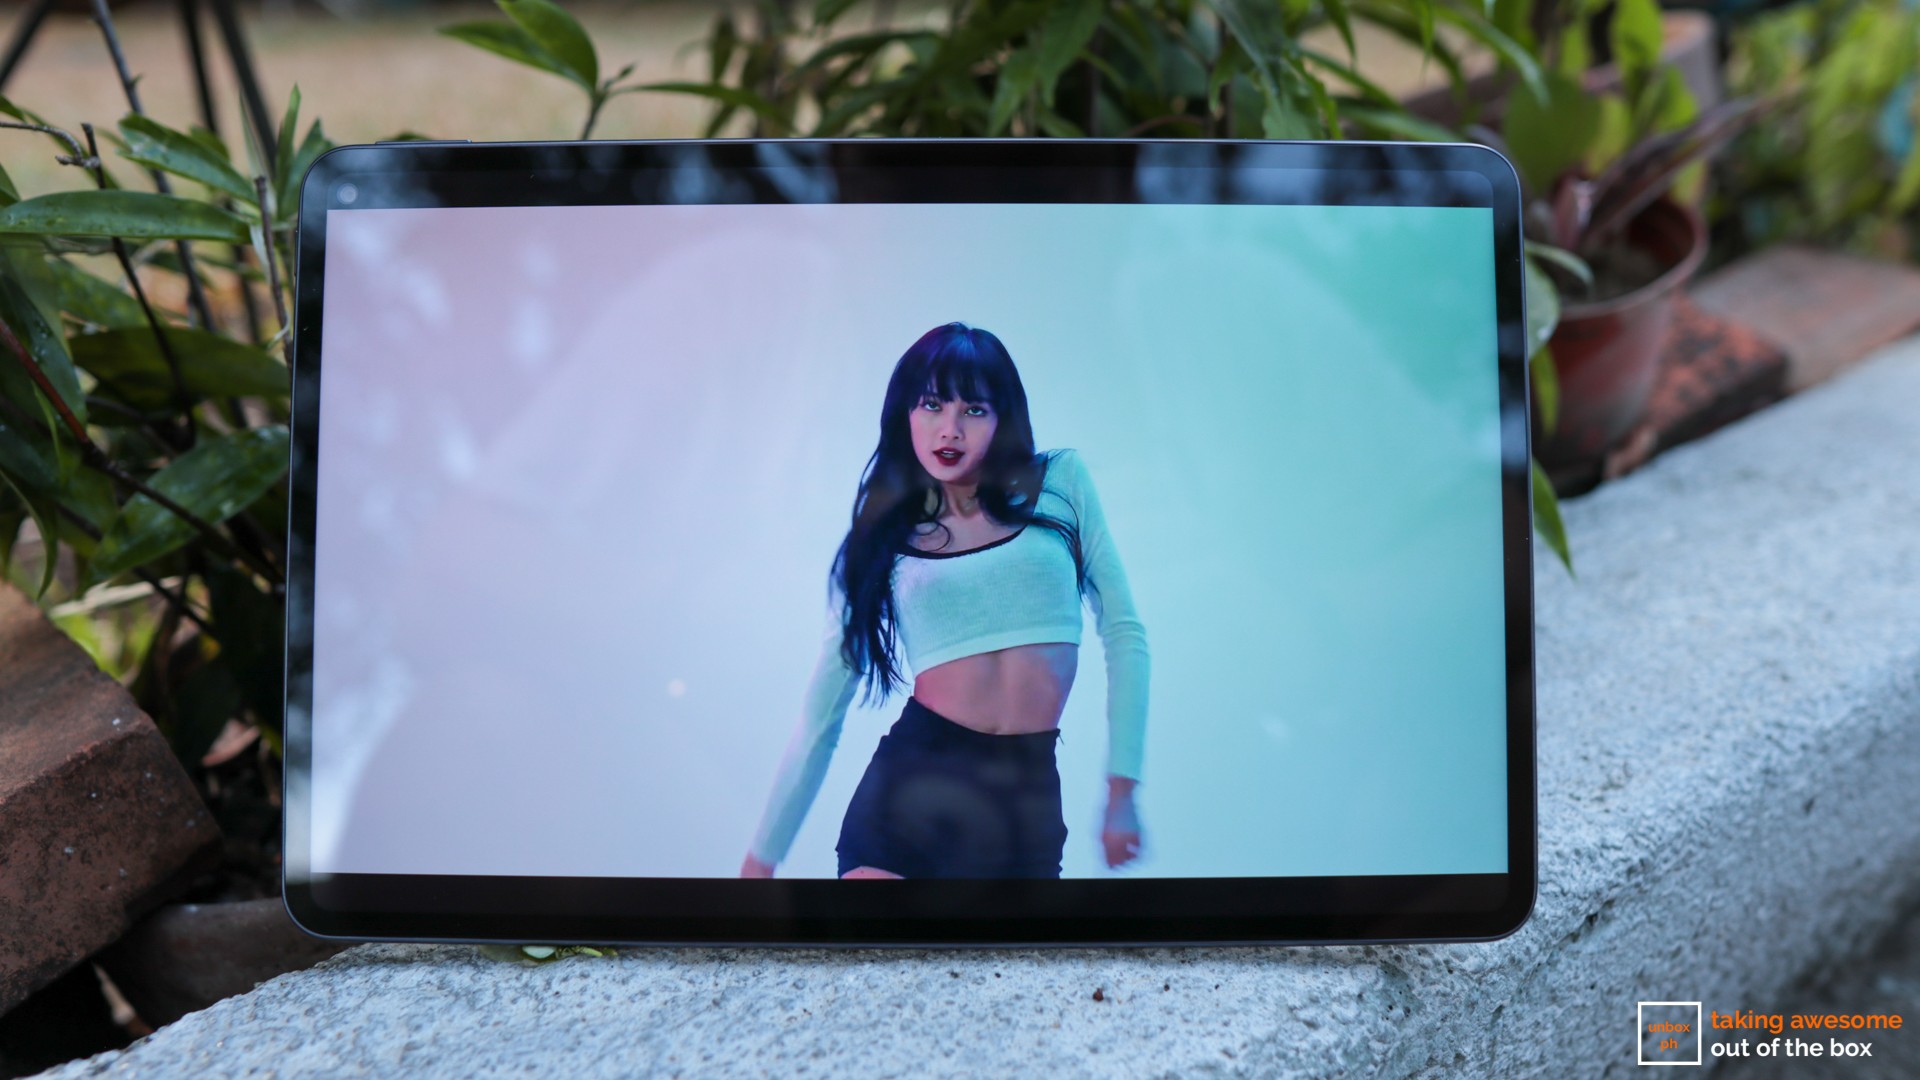 blackpink music video shown on the huawei matepad pro